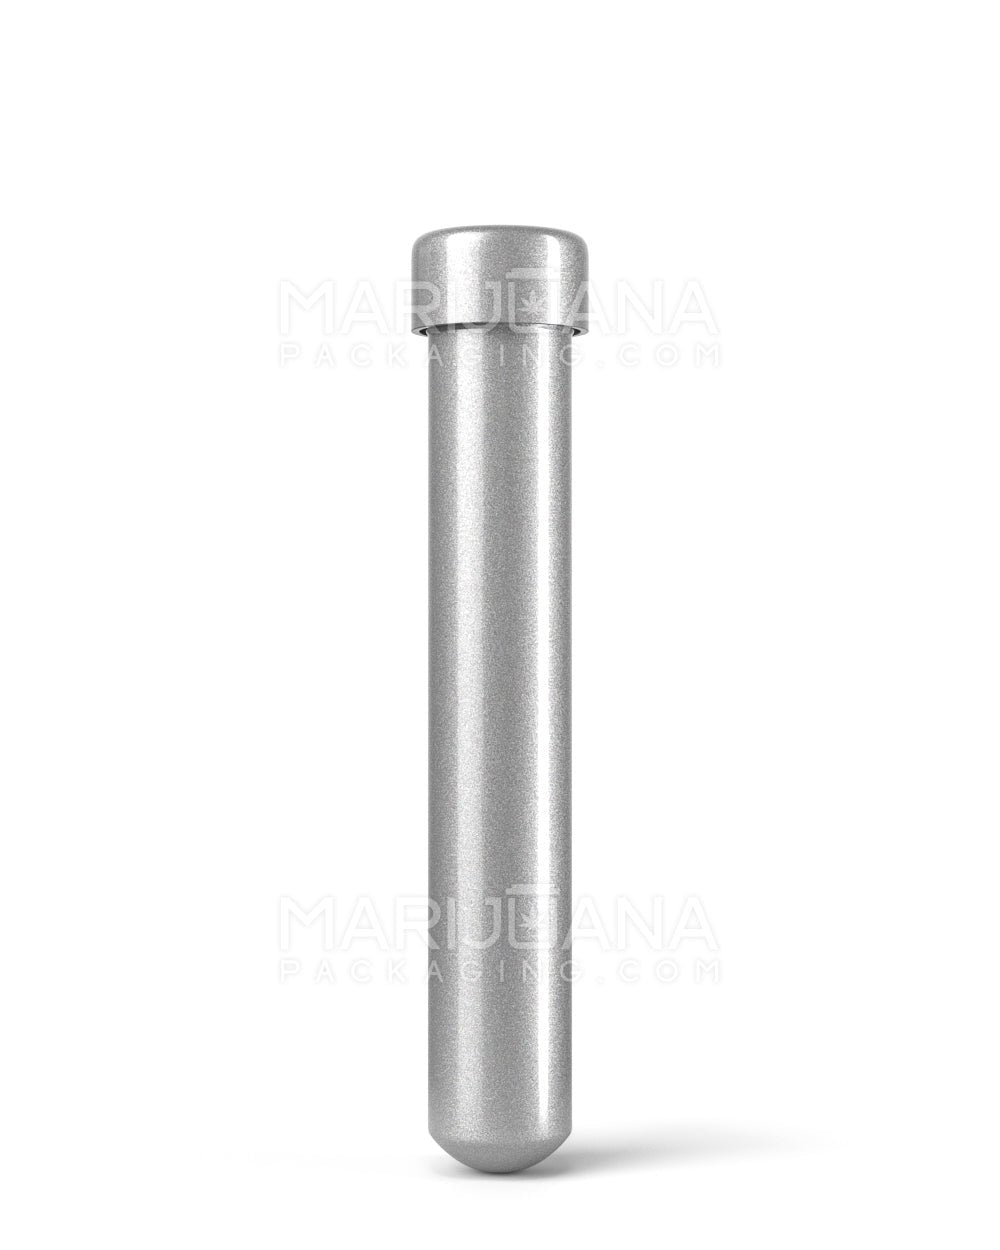 Child Resistant | King Size Pop Top Opaque Metal Pre-Roll Tubes | 110mm - Silver - 250 Count - 1